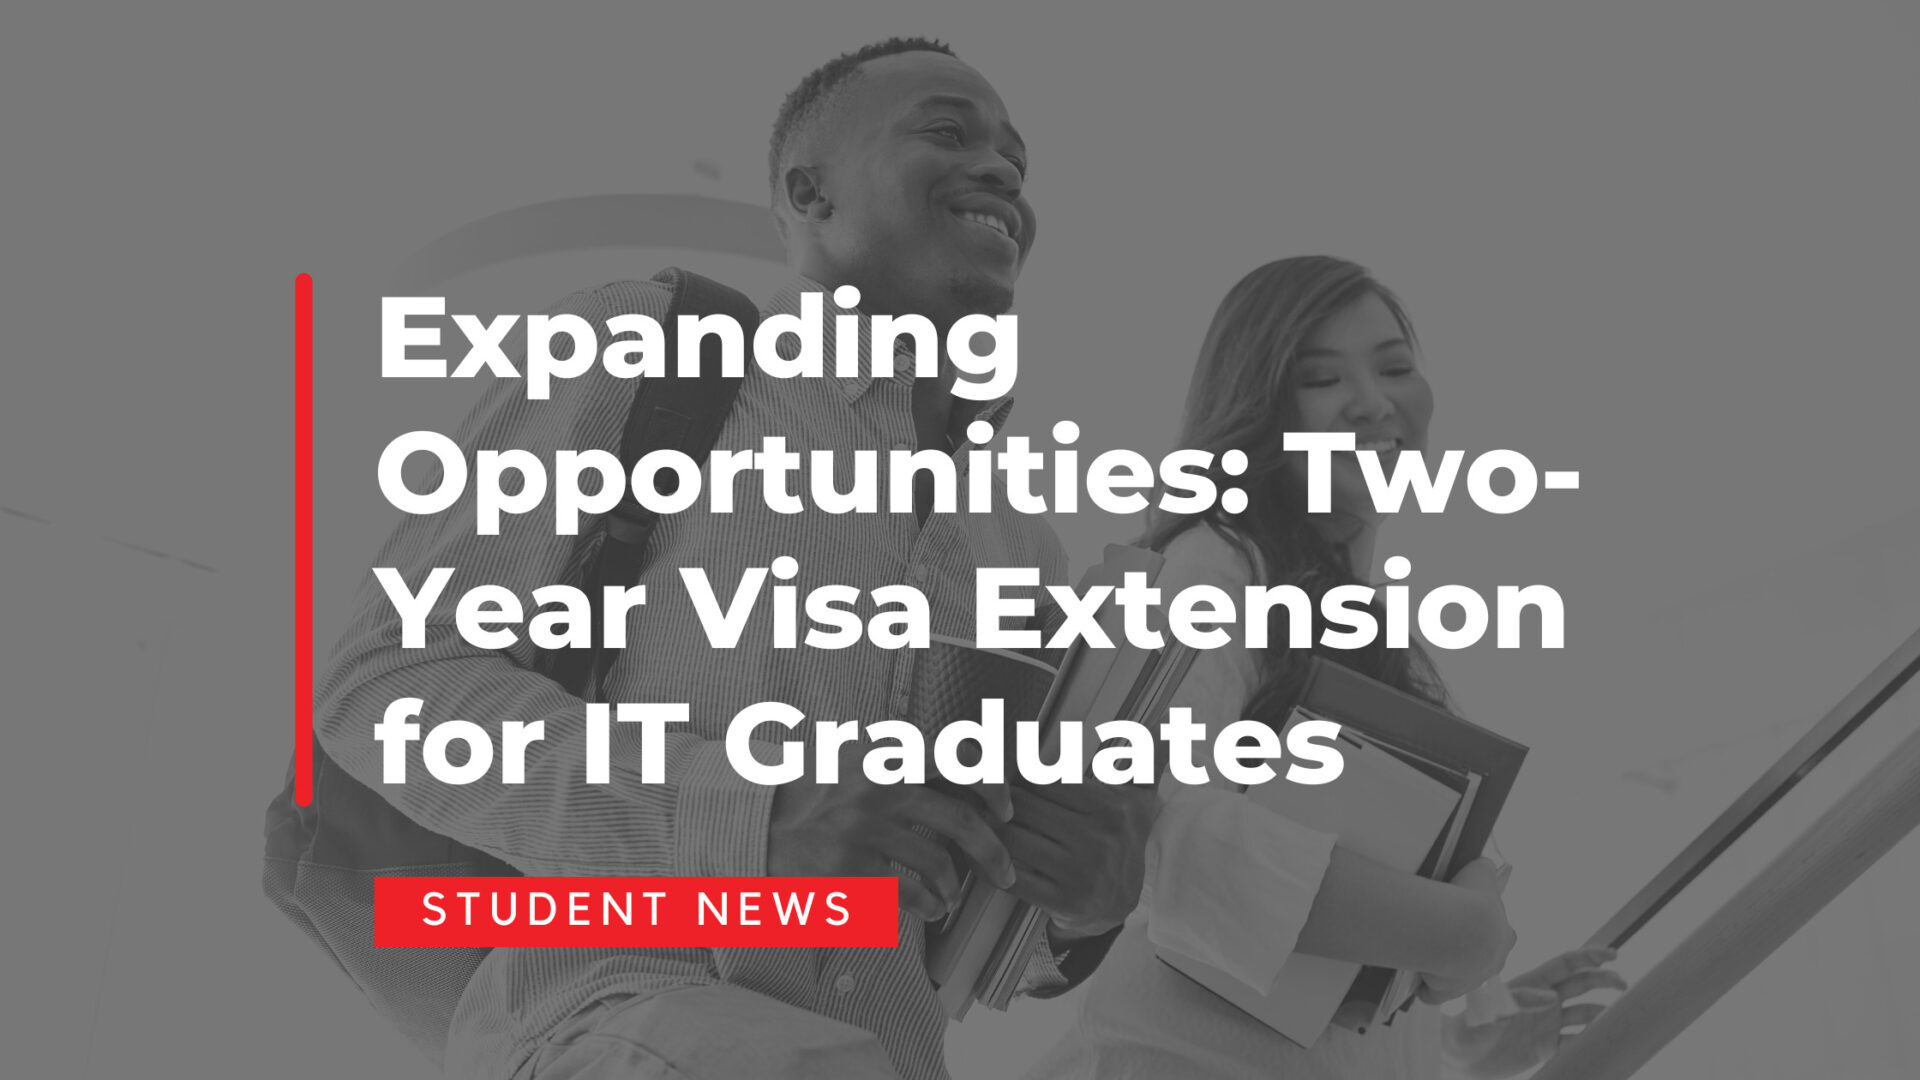 Expanding Opportunities: Two-Year Visa Extension for IT Graduates and University Pathway Agreements